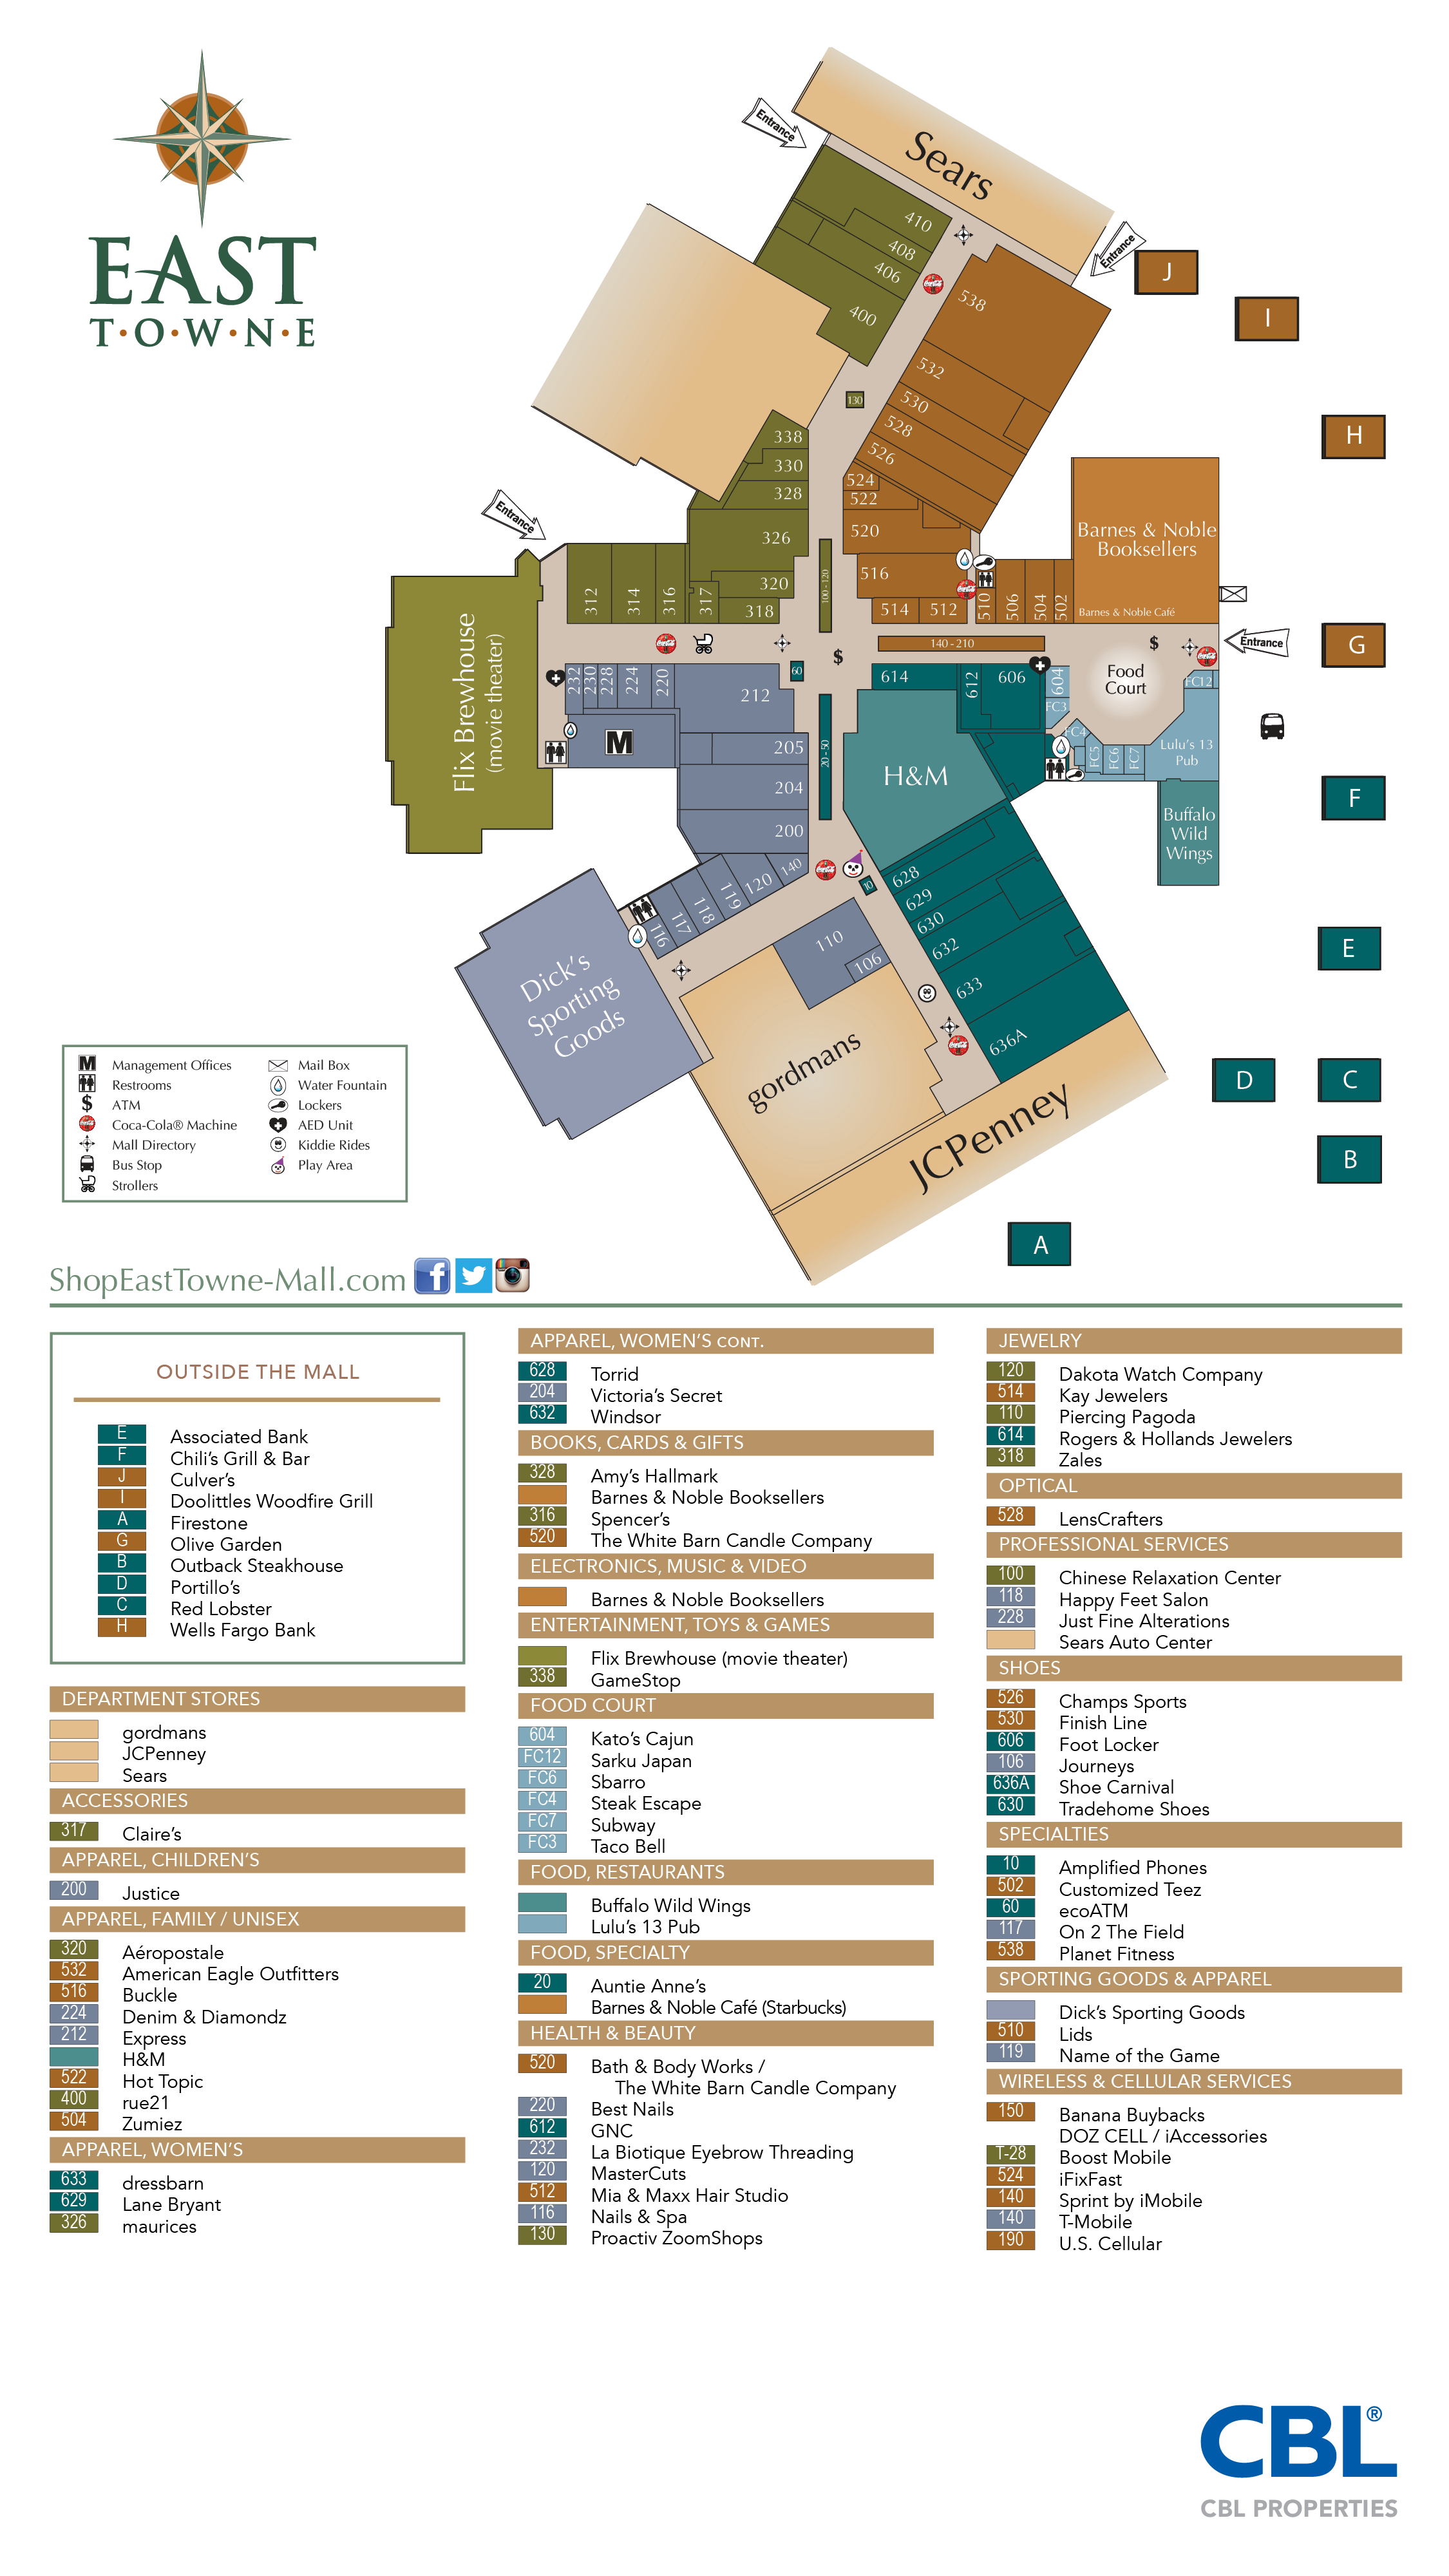 Mall Directory | East Towne Mall